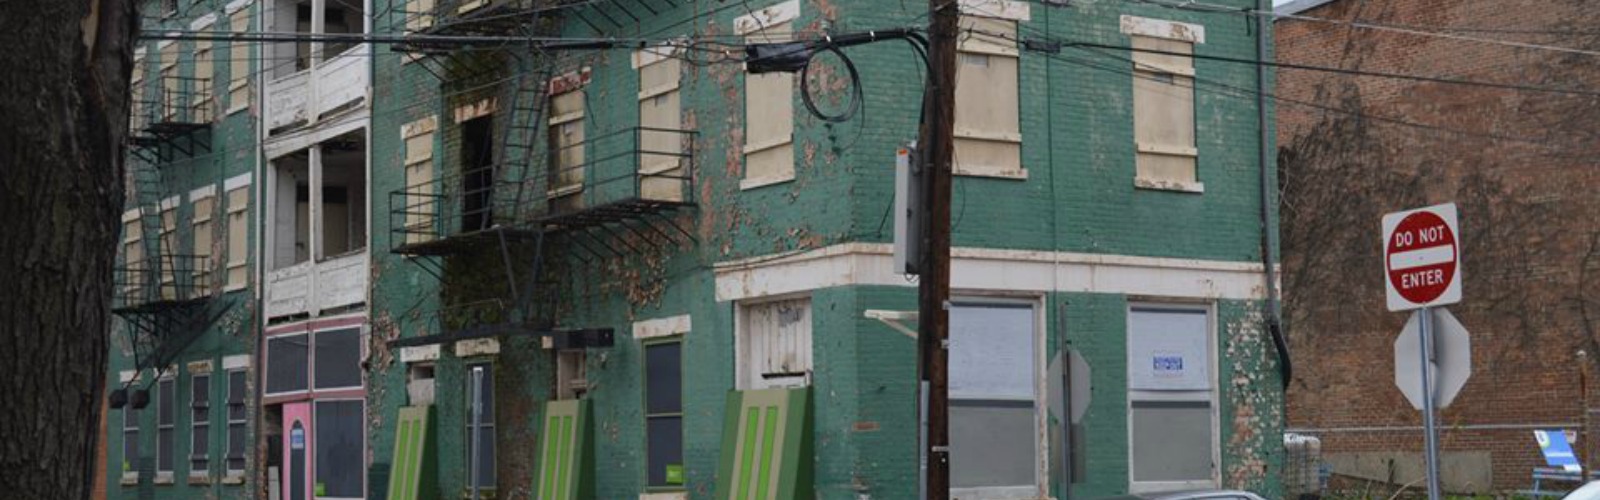 The 100% Housing Initiative is working to fix up vacant homes for residents in need.